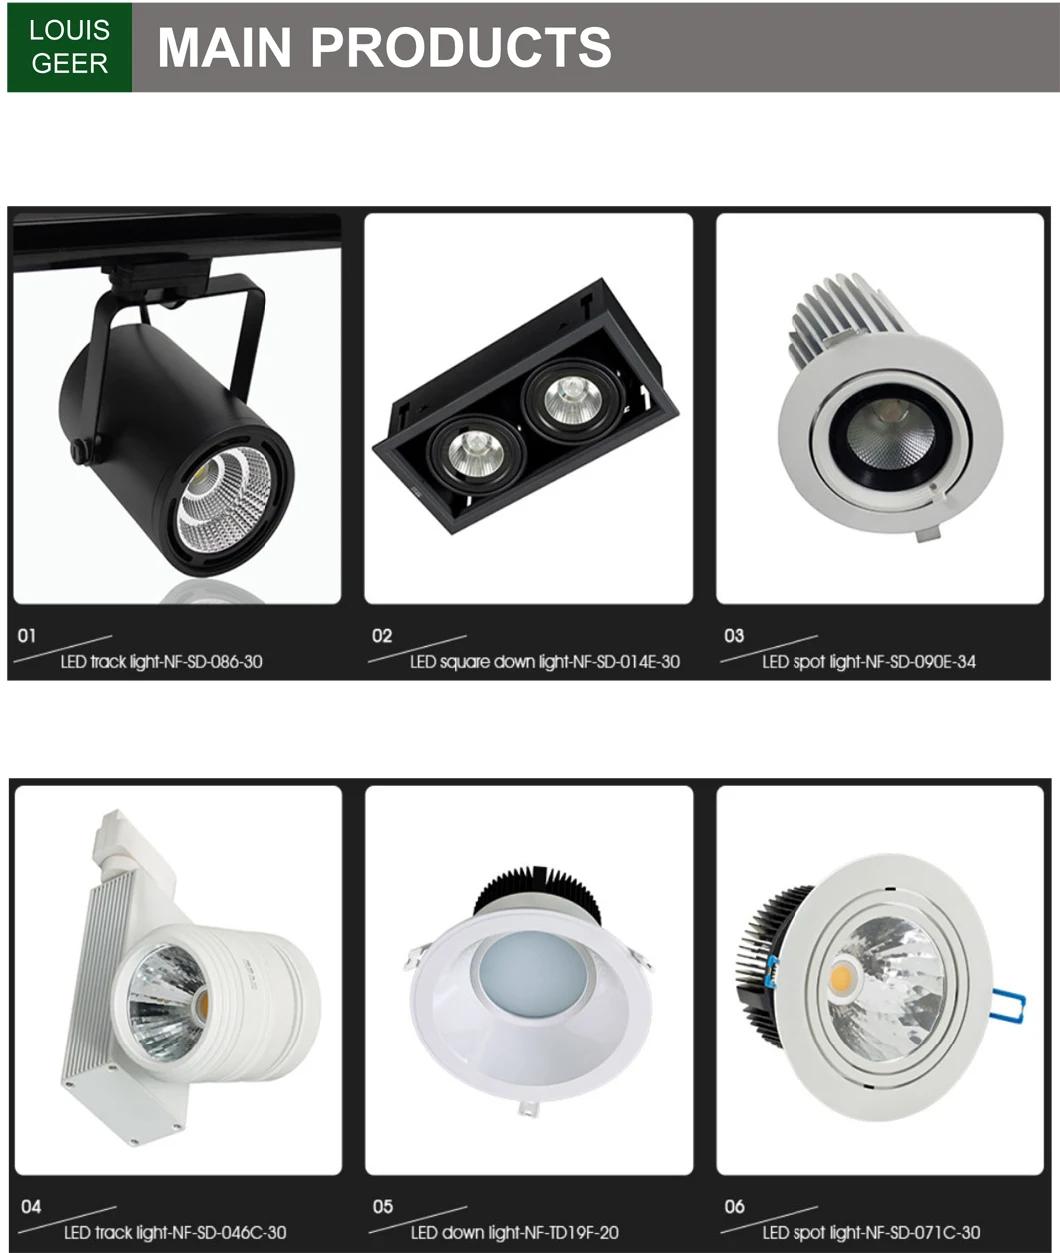 Special Design for LED Museum Track Lighting PC Material Mini 12W Lights LED Track Lights